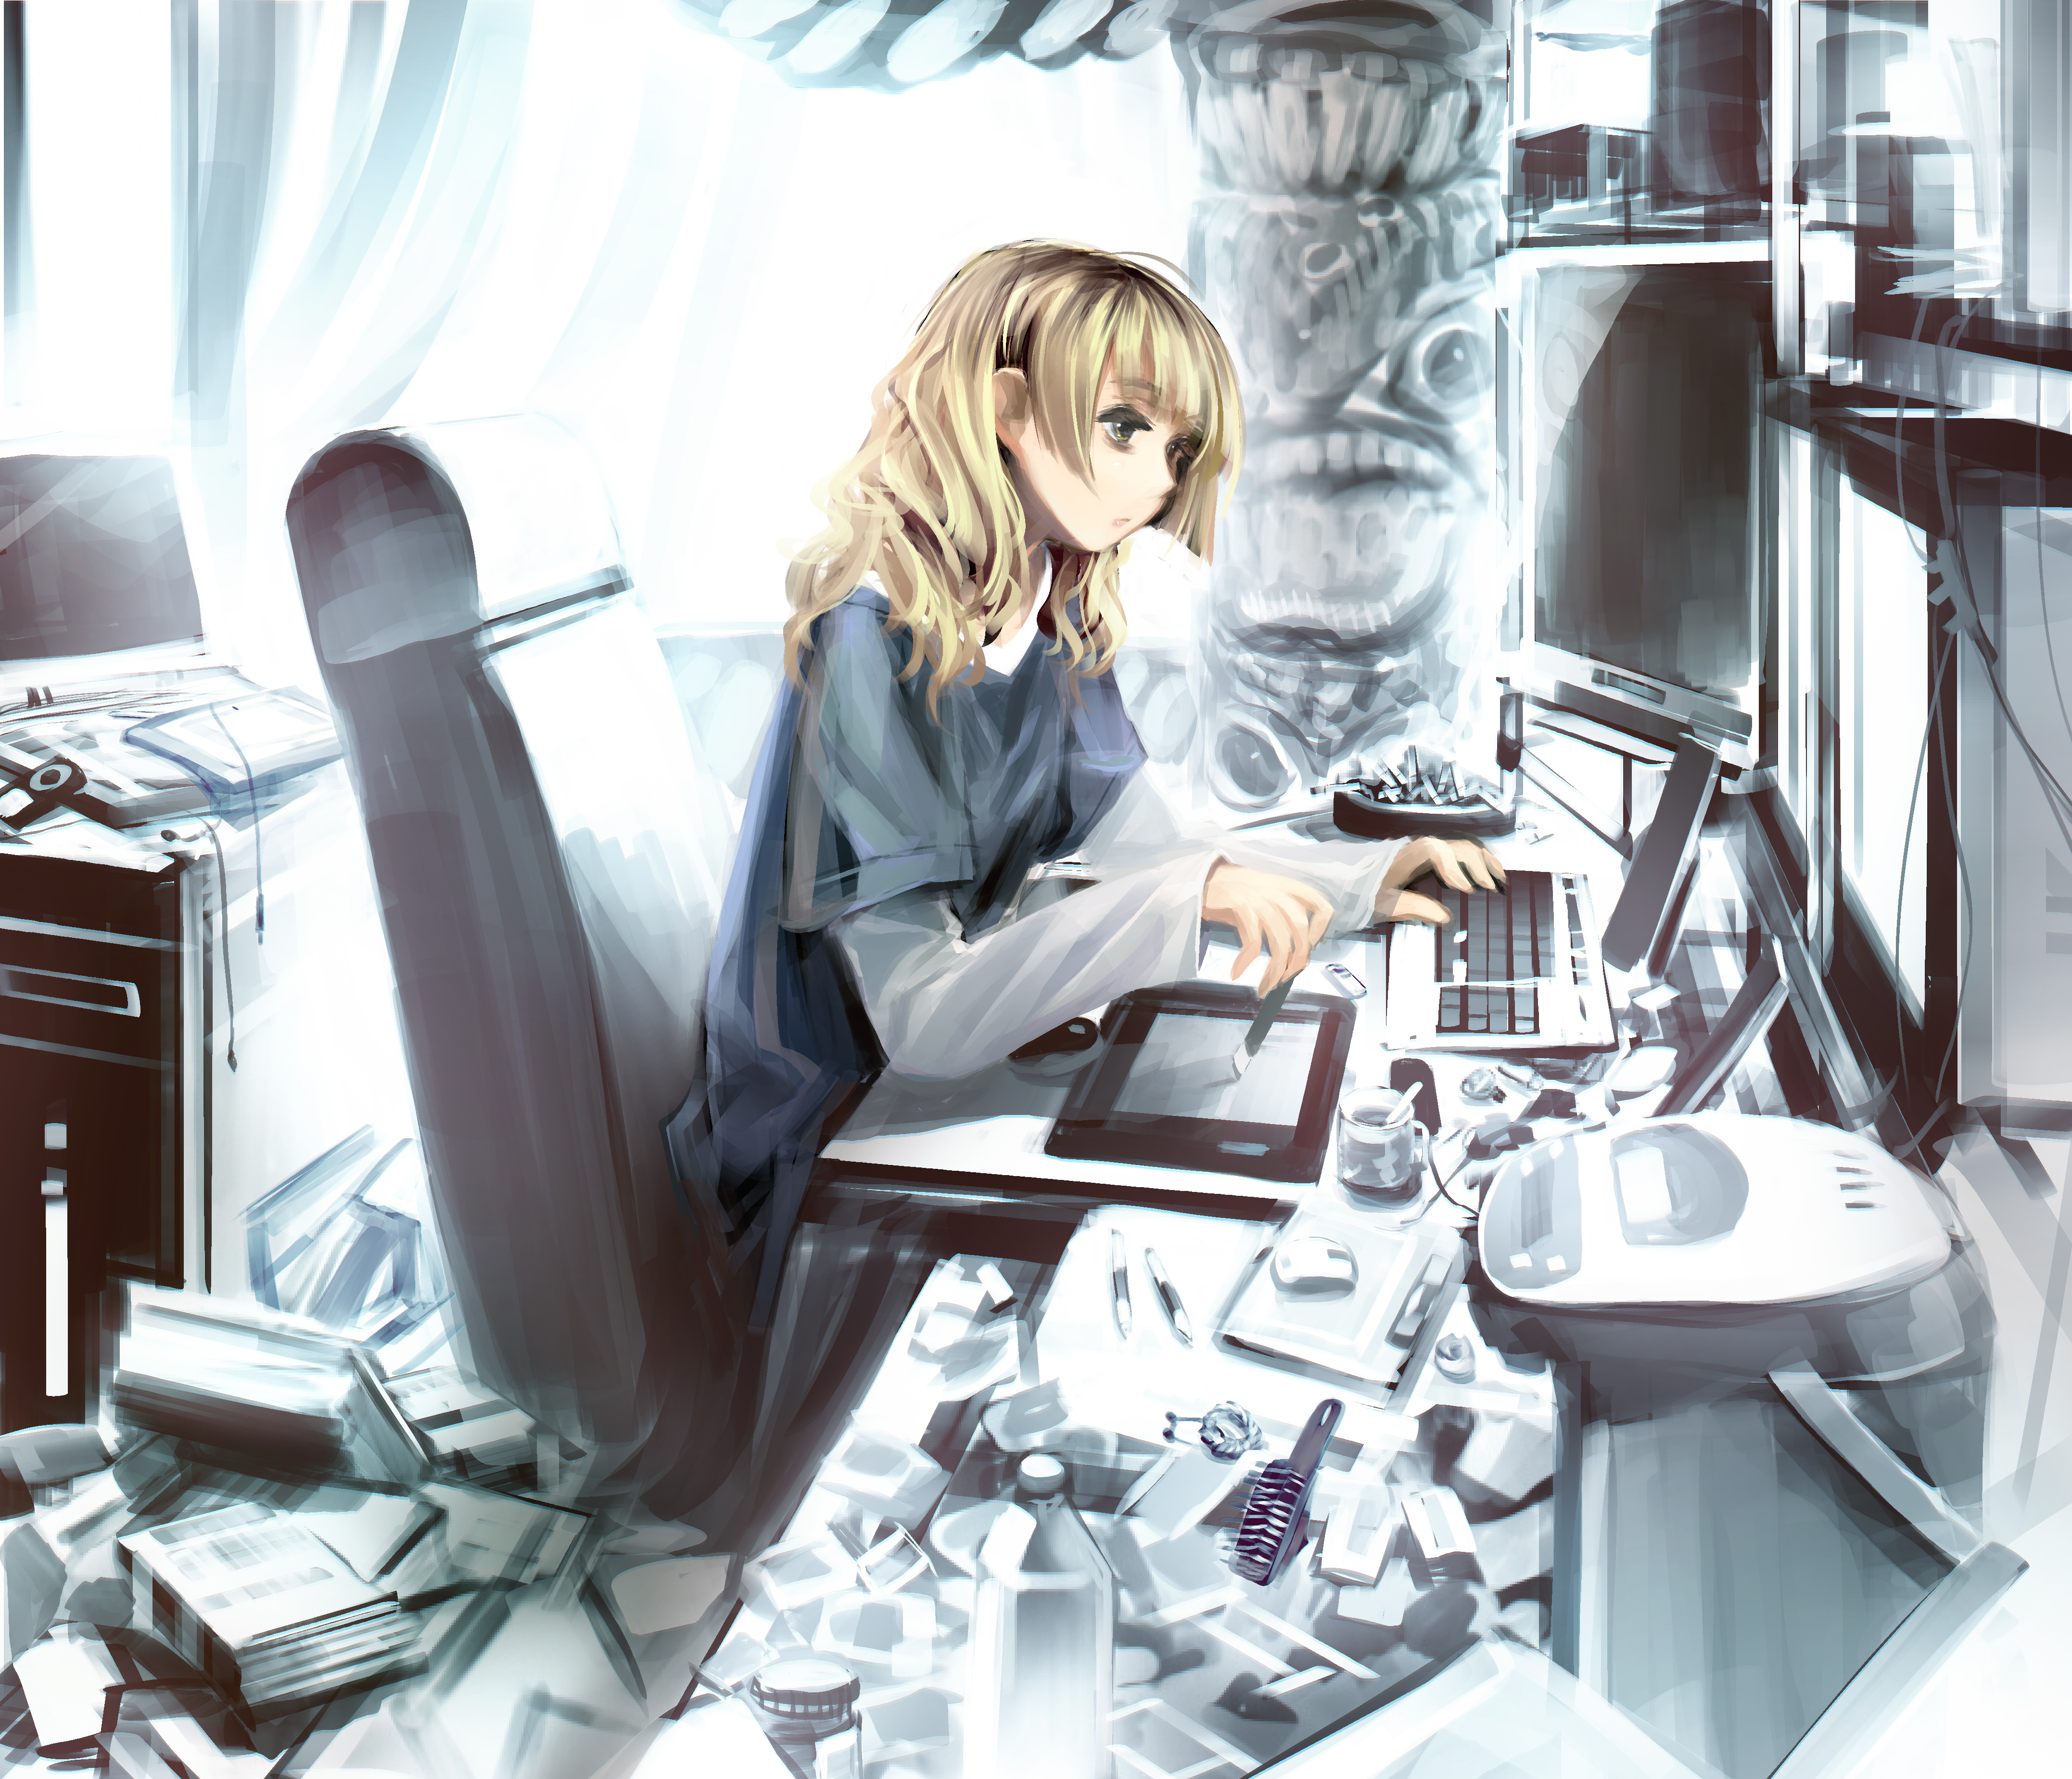 blondes, computers, indoors, room, keyboards, long hair, tables, mess, yellow eyes, messy, chairs, t-shirts, sitting, graphics tablets, soft shading, anime girls, hime cut, mp3 player, totem pole, Oekaki Musume, bangs, original characters - desktop wallpaper